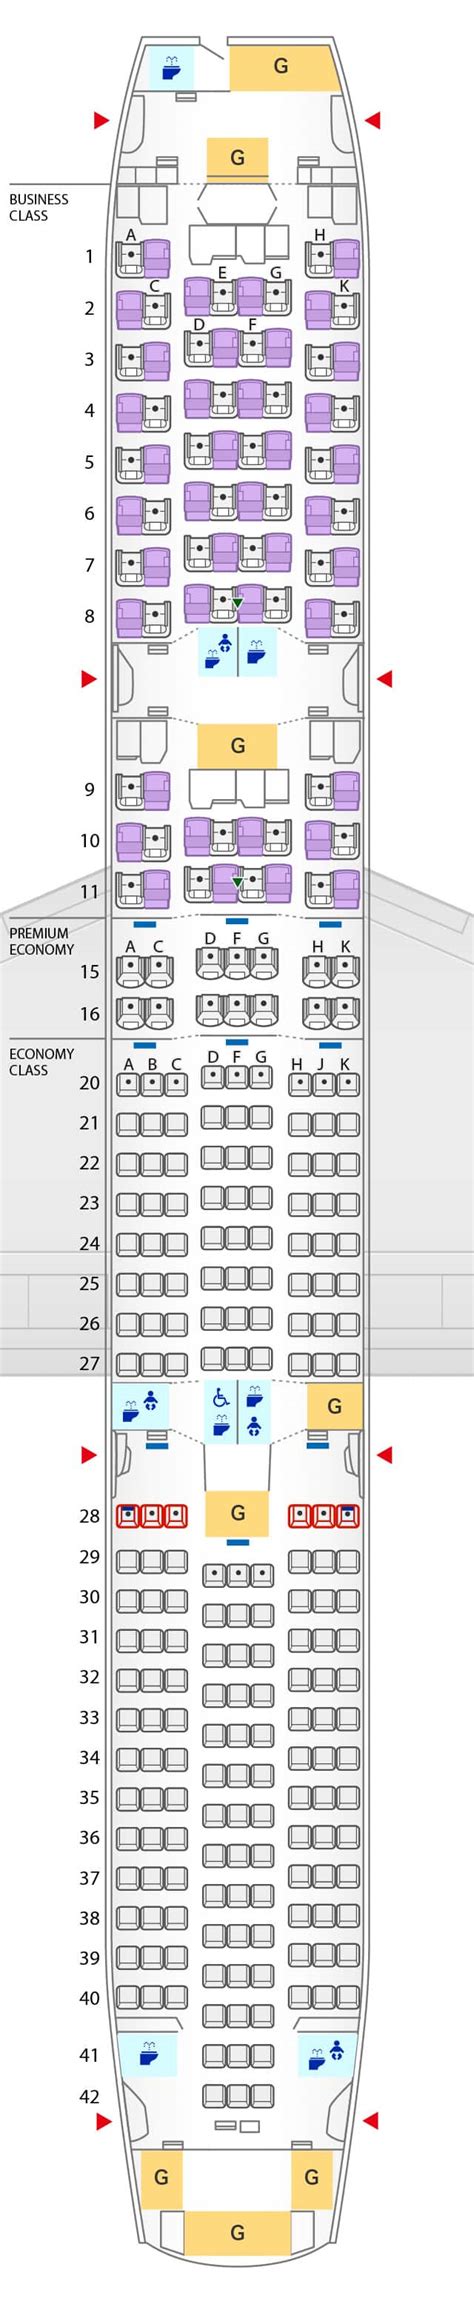 Boeing 787 9 dreamliner seat map. Business Class seats offer a privacy shell, 6 ft 1 inch full flat bed and direct aisle access from every seat. Each seat has 15-inch LCD screen, with noise-canceling headsets, in-seat power sockets, audio/ethernet connectivity, in-built massage, luxury comforters and pillows. Economy Class offers a 31" inch seat pitch. 